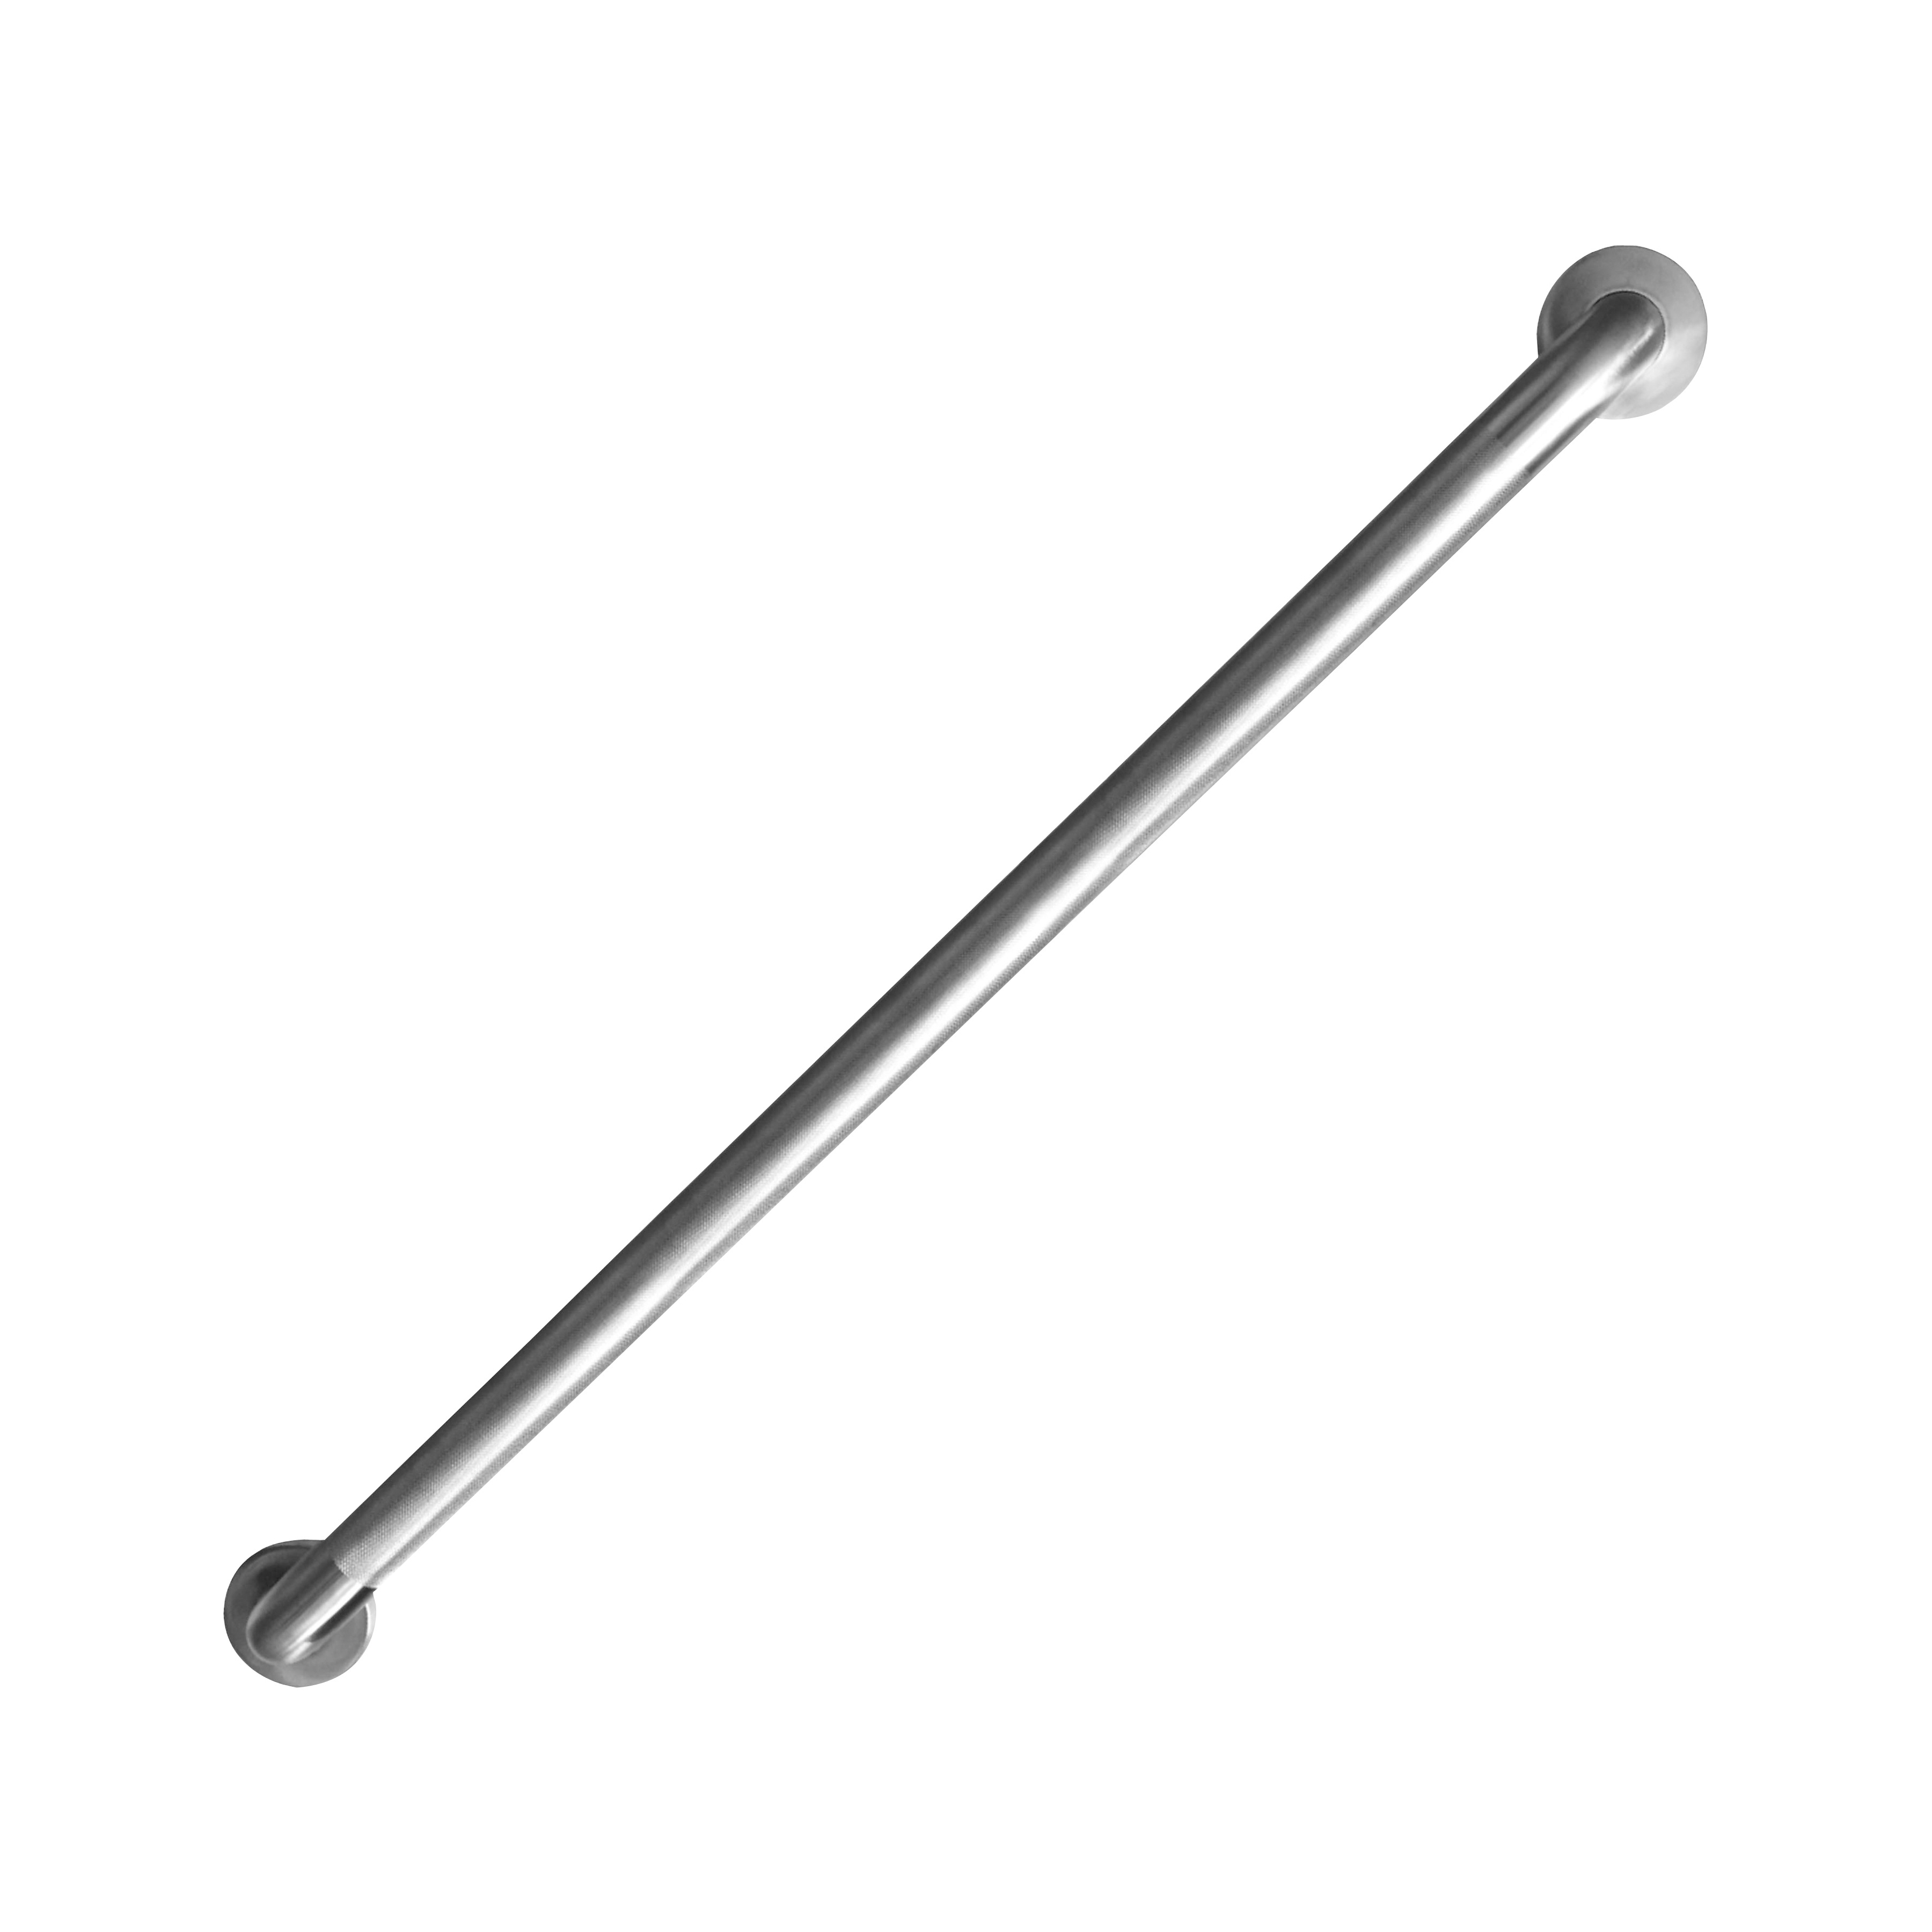 Boston Harbor SG01-01&0436 Grab Bar, 36 in L Bar, Stainless Steel, Wall Mounted Mounting